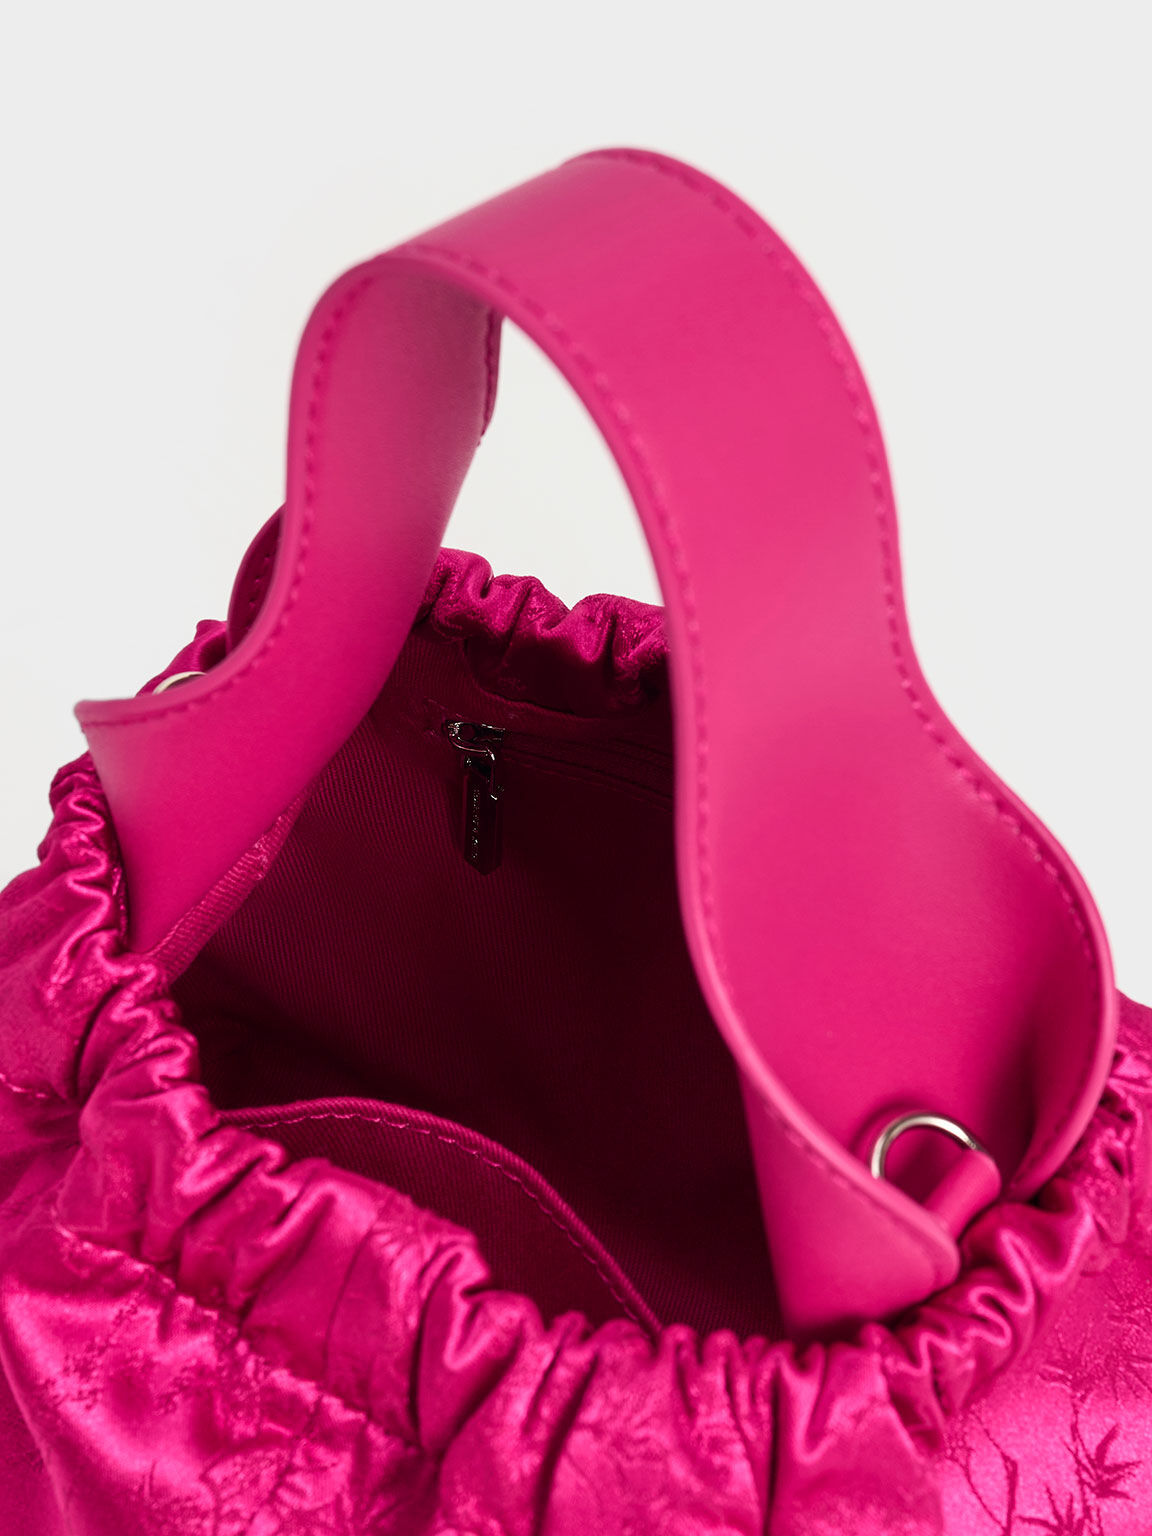 Fuchsia Mini Alcott Scarf Handle Quilted Bag - CHARLES & KEITH IN